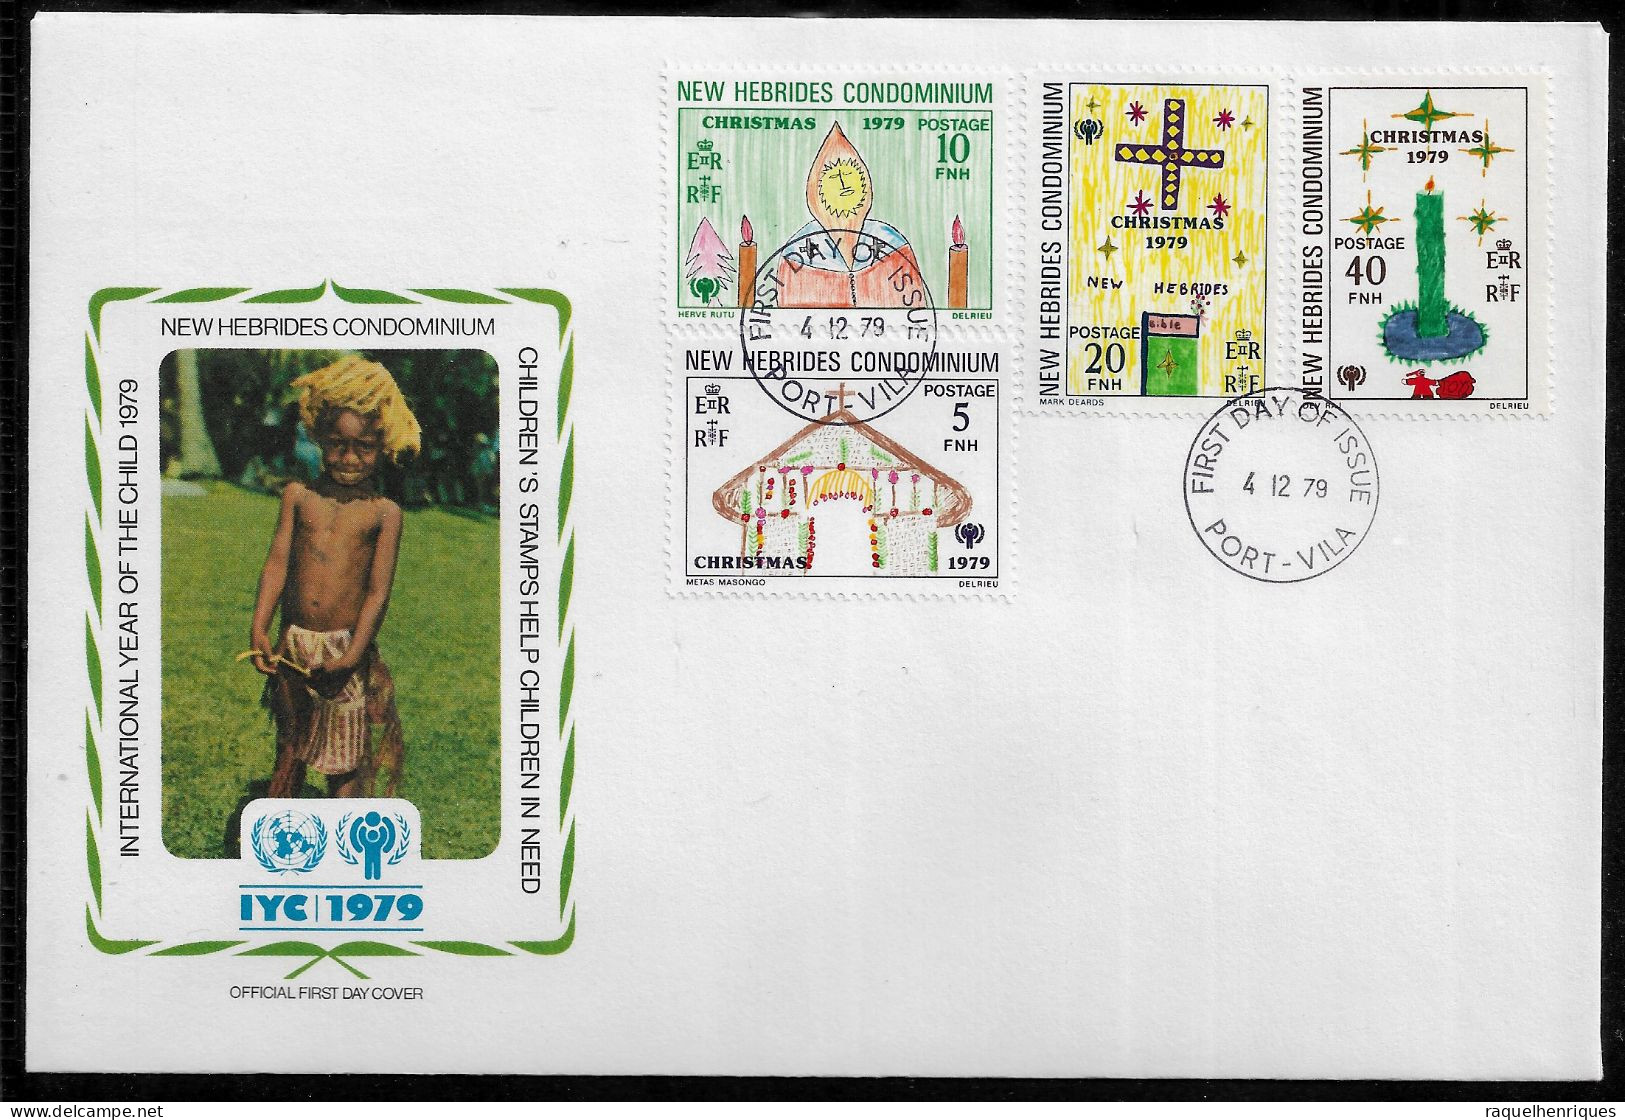 NEW HEBRIDES FDC COVER - 1979 International Year Of The Child ENGLISH SET FDC (FDC79#04) - Lettres & Documents